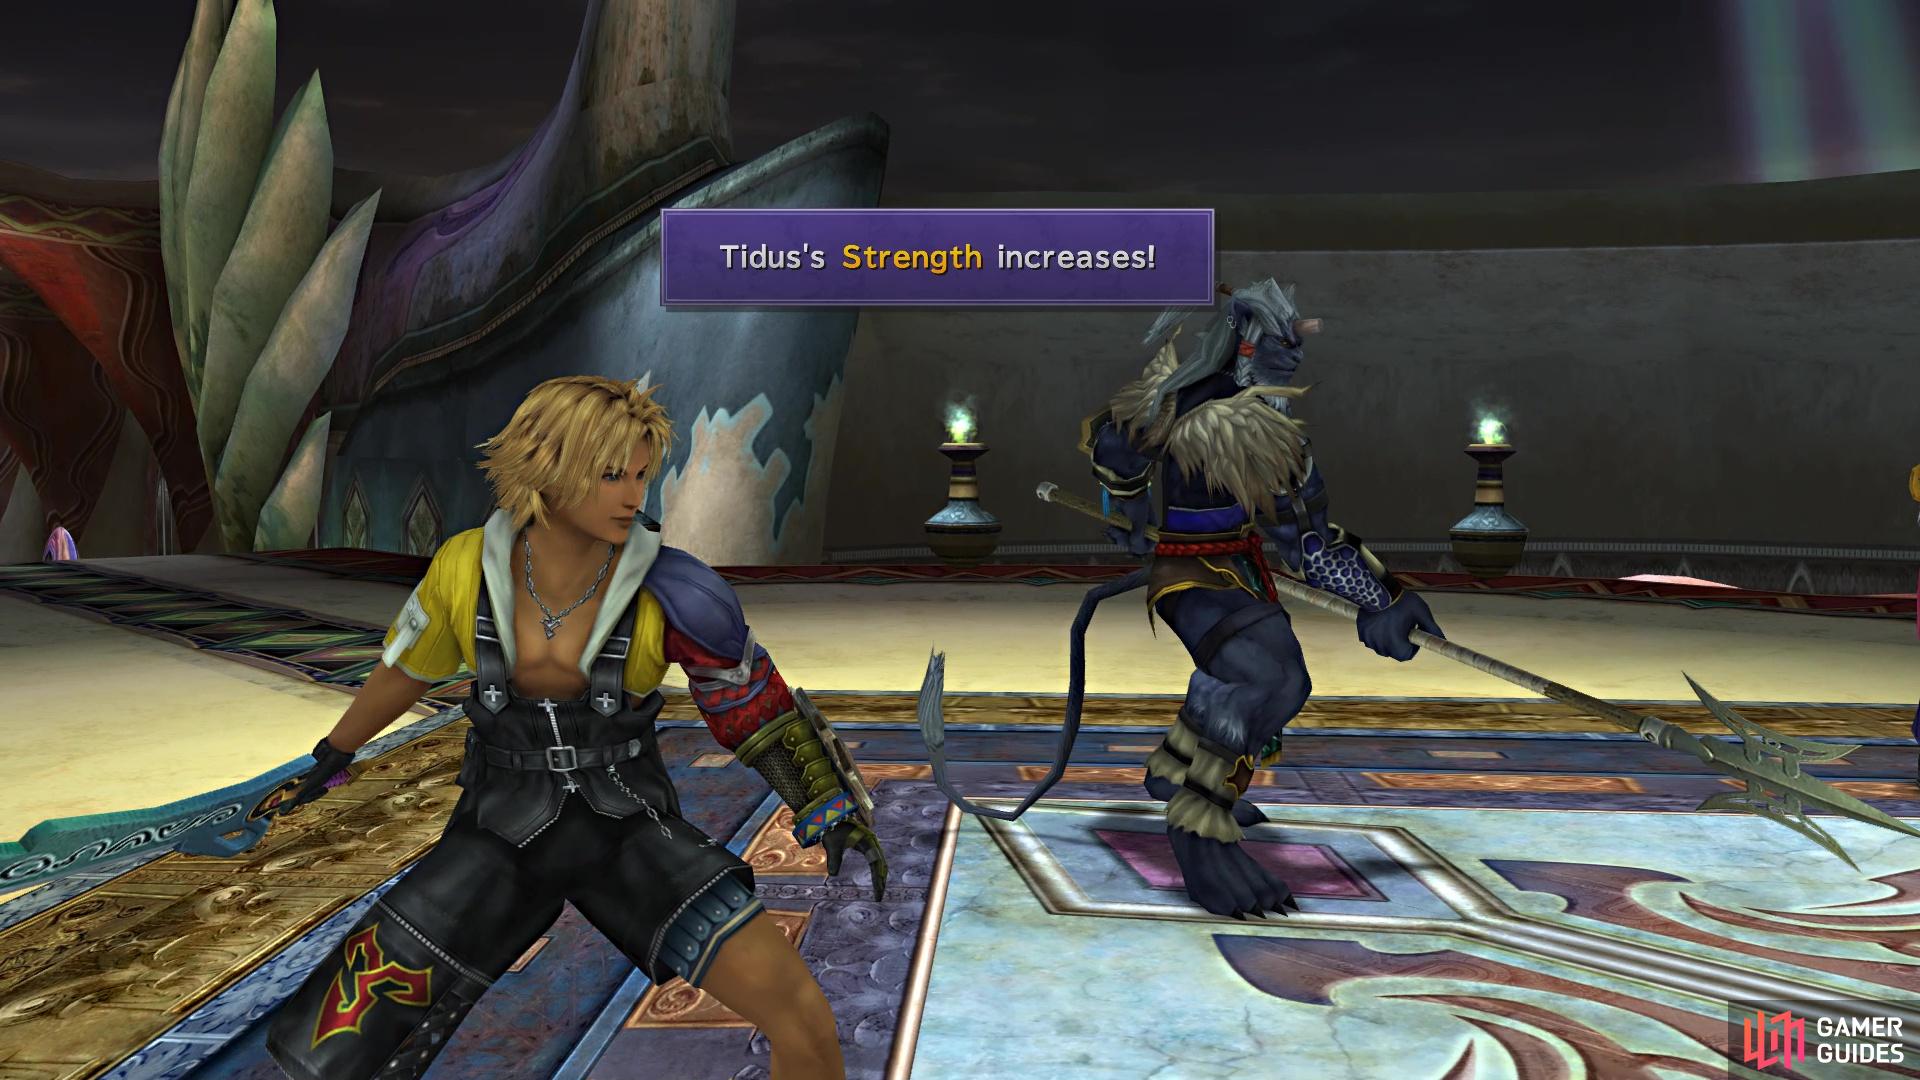 Use the Trigger Commands to get some stats for Tidus, Auron and Yuna